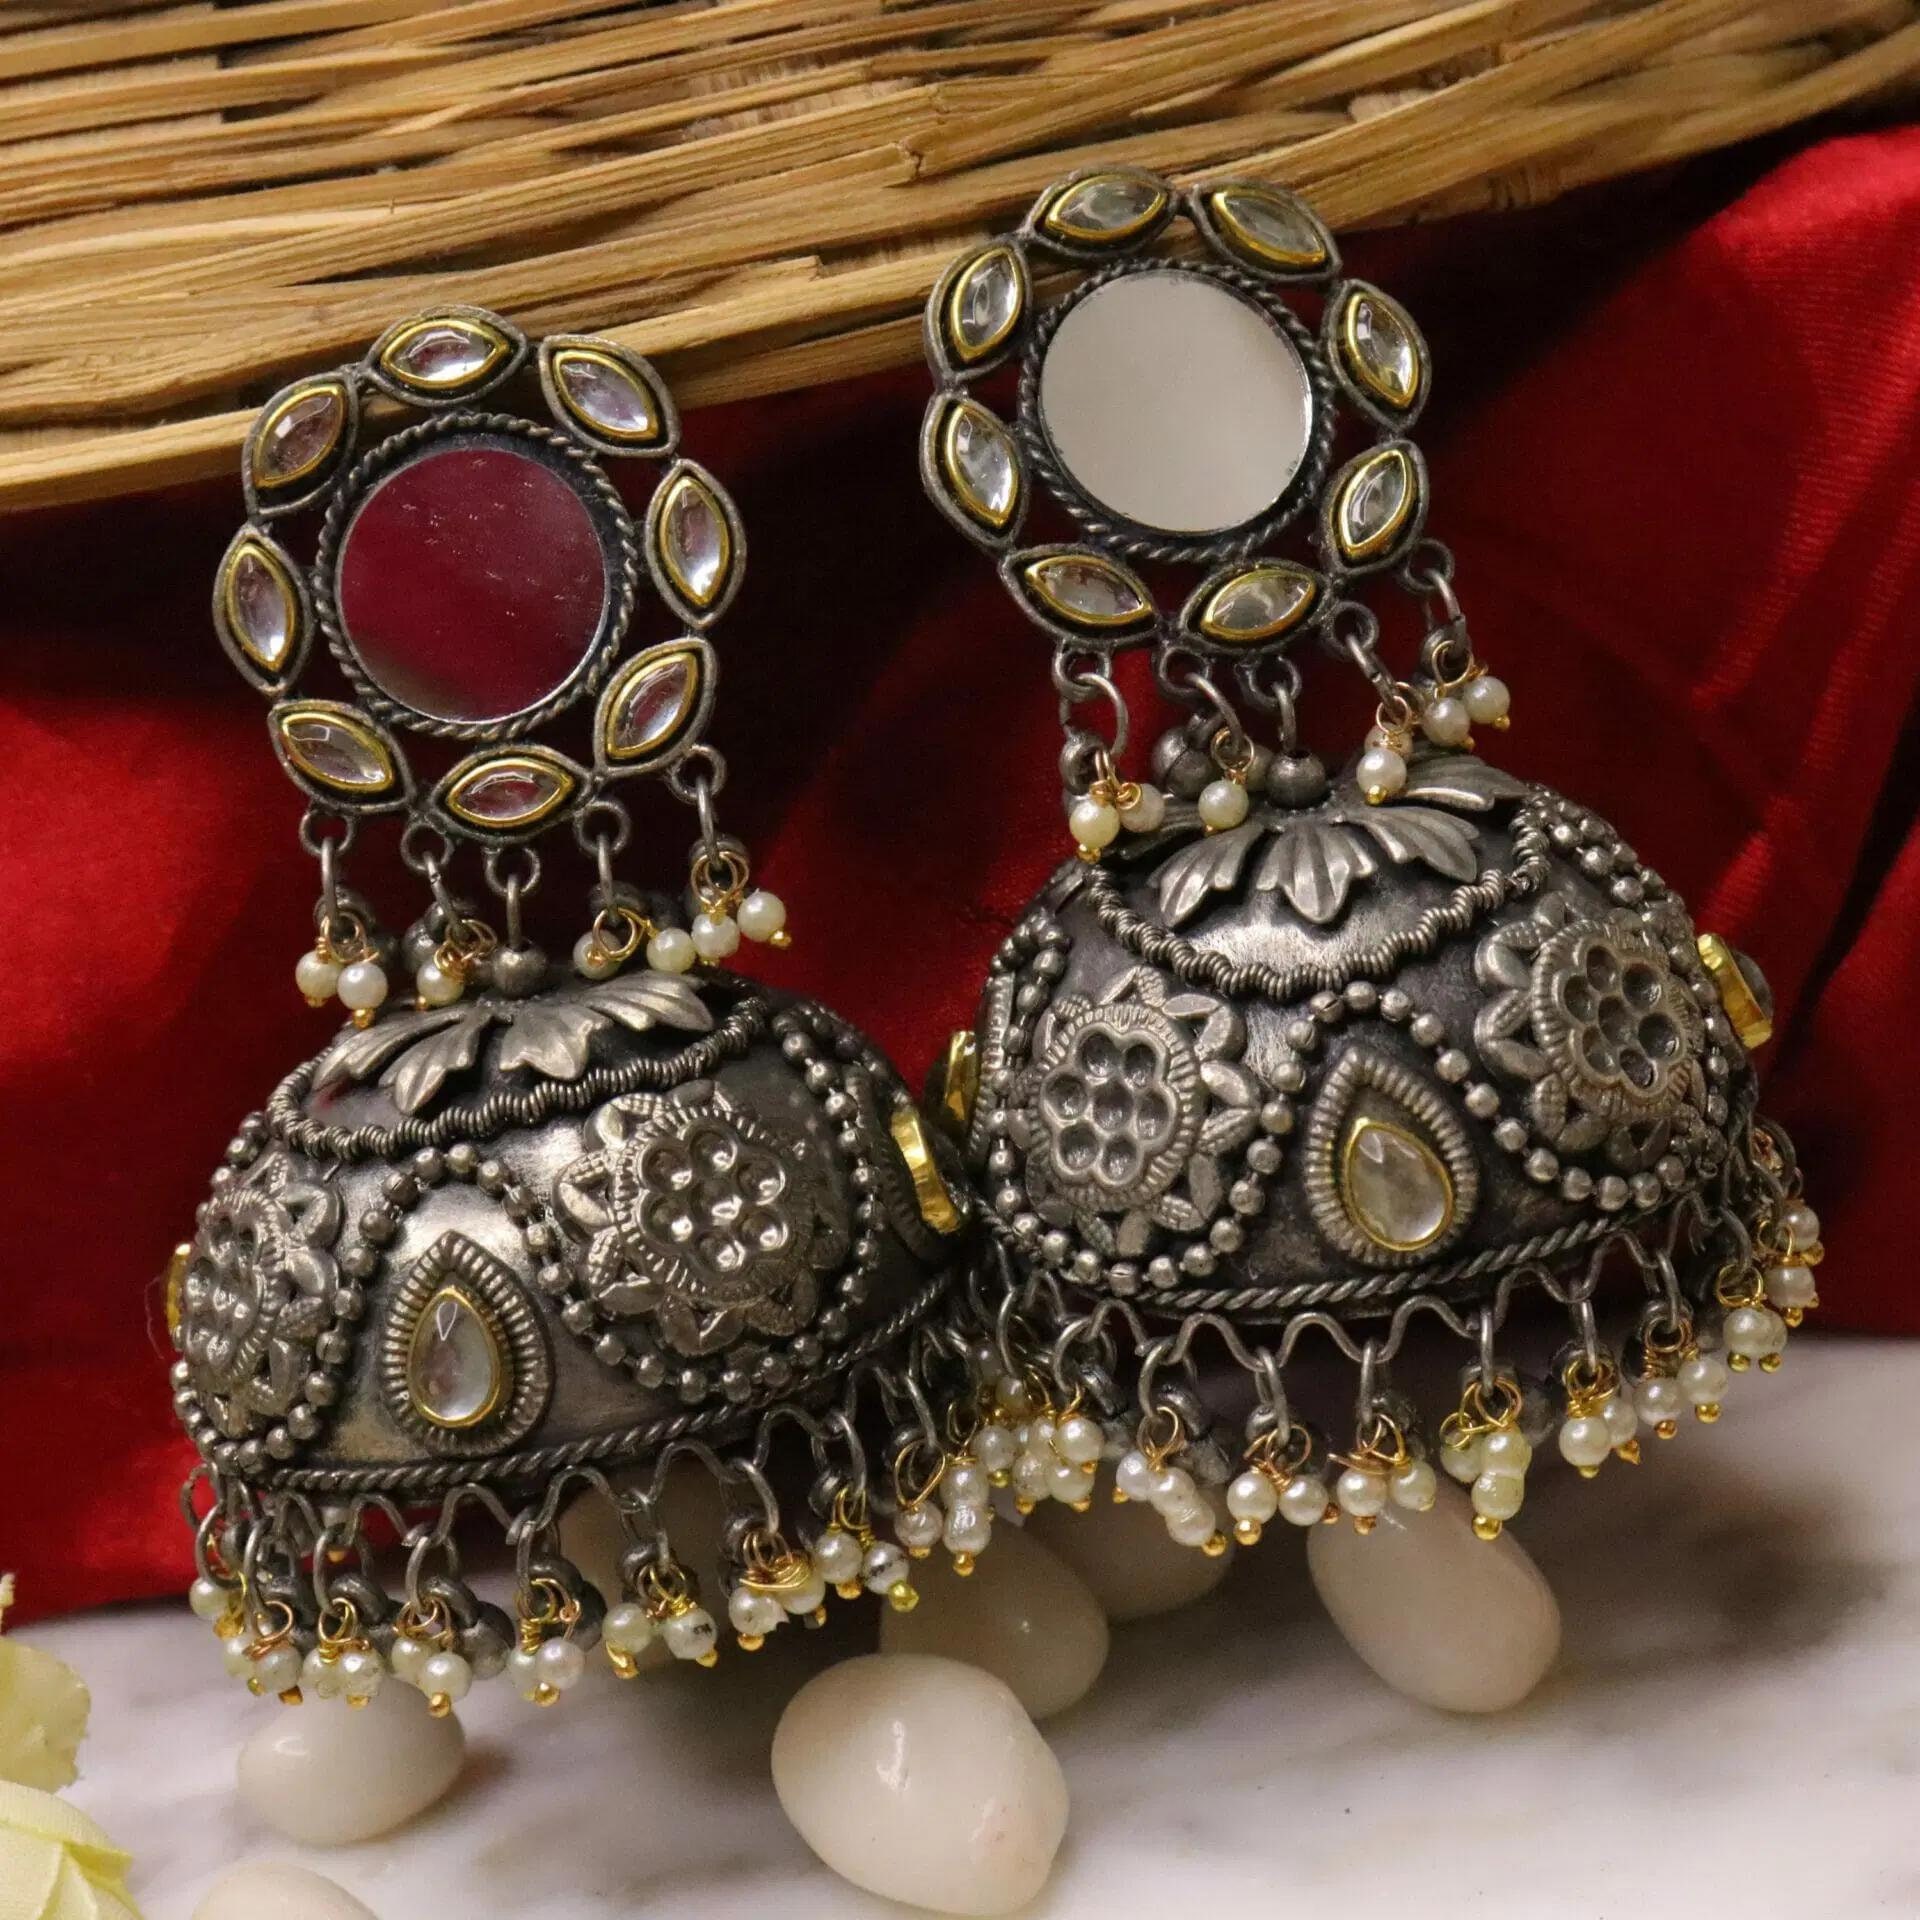 Bollywood Oxidized Silver Plated Handmade Big Statement Earrings, Jhumka  Jewelry for Women, Indian Antique Look Vintage Jumka Earring, - Etsy